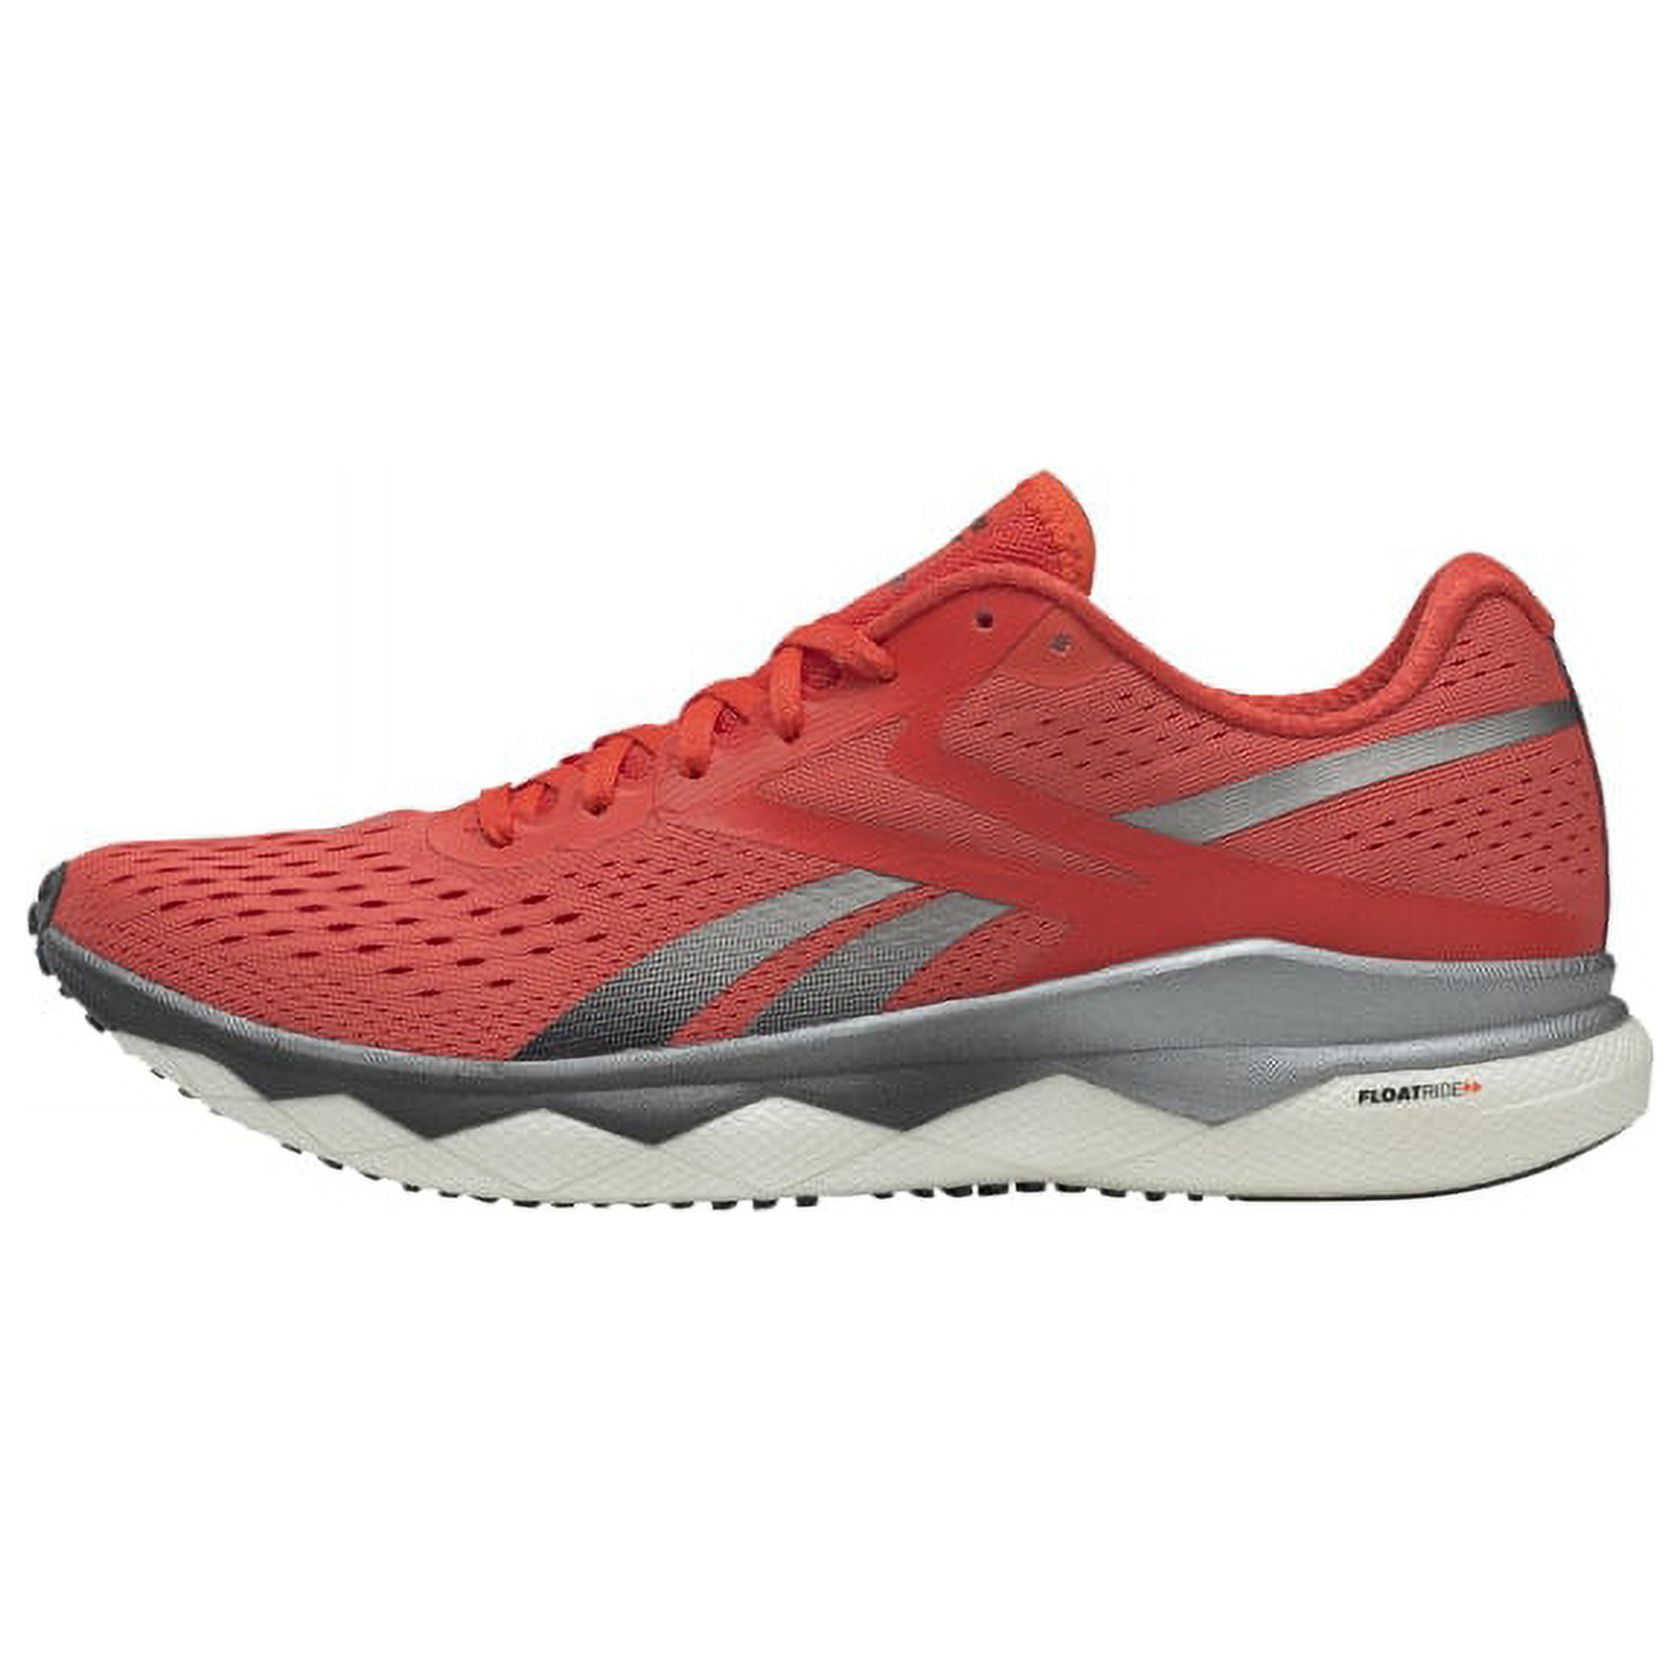 Reebok Mens Floatride Run Fast 2.0 Fitness Workout Athletic and Training Shoes - image 2 of 9